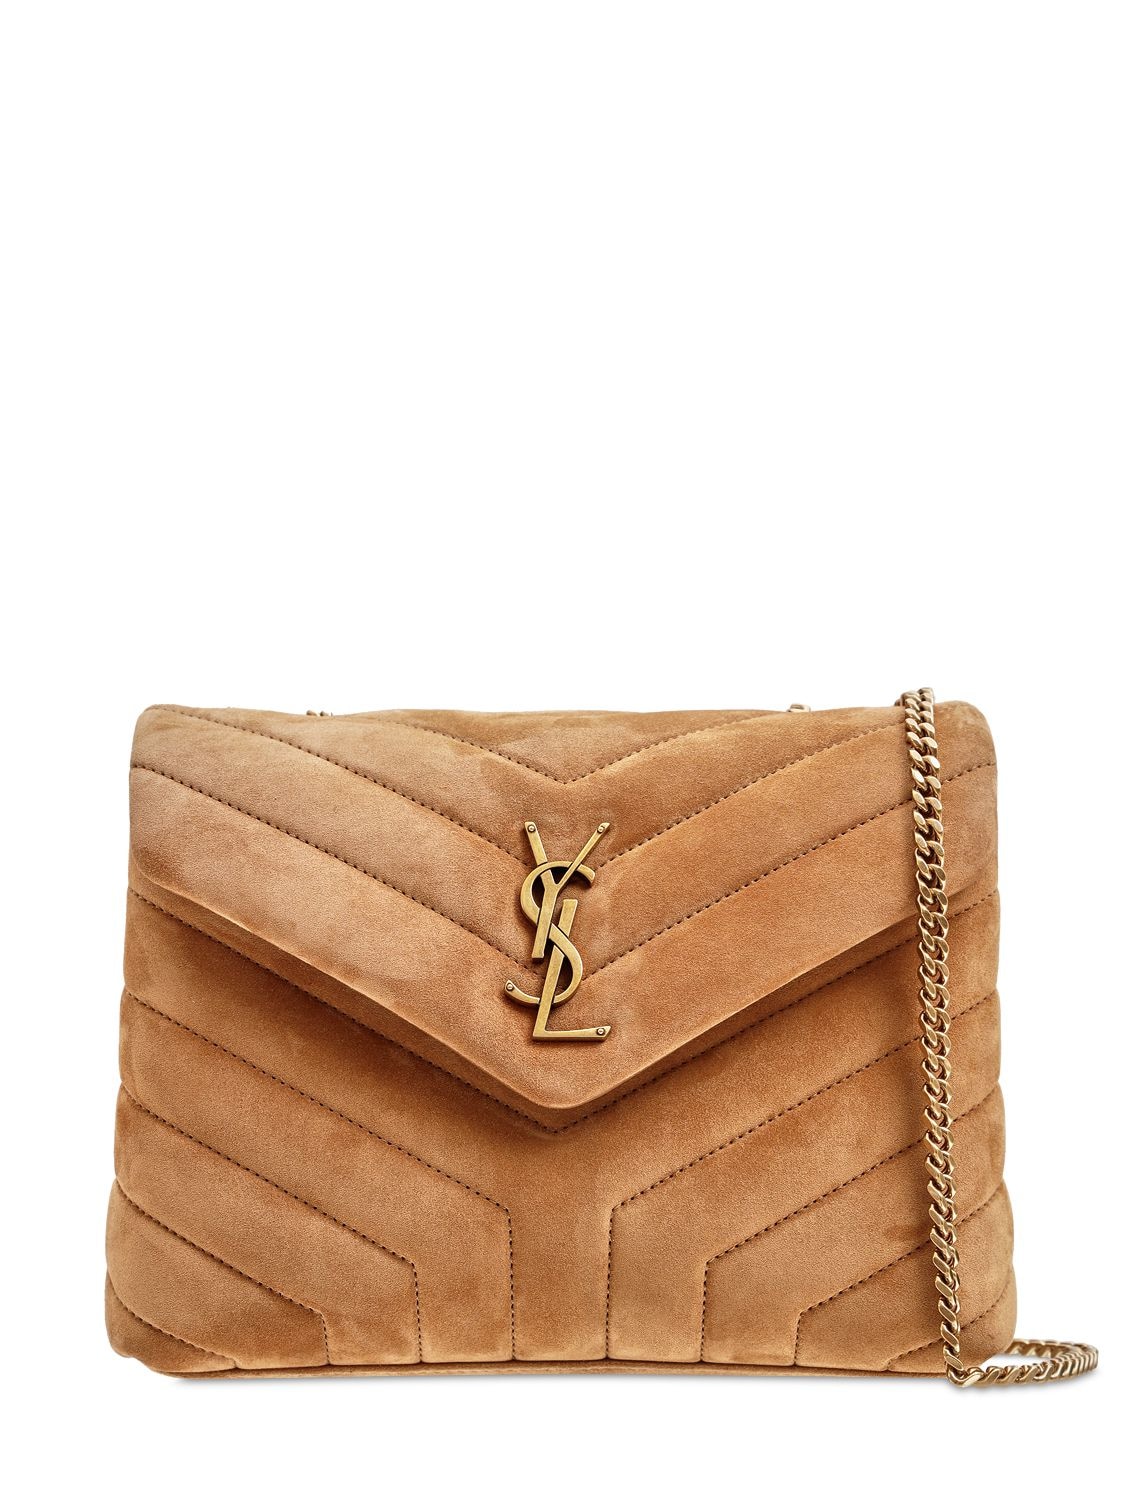 Saint Laurent Small Loulou Monogram Quilted Suede Bag In Cuir